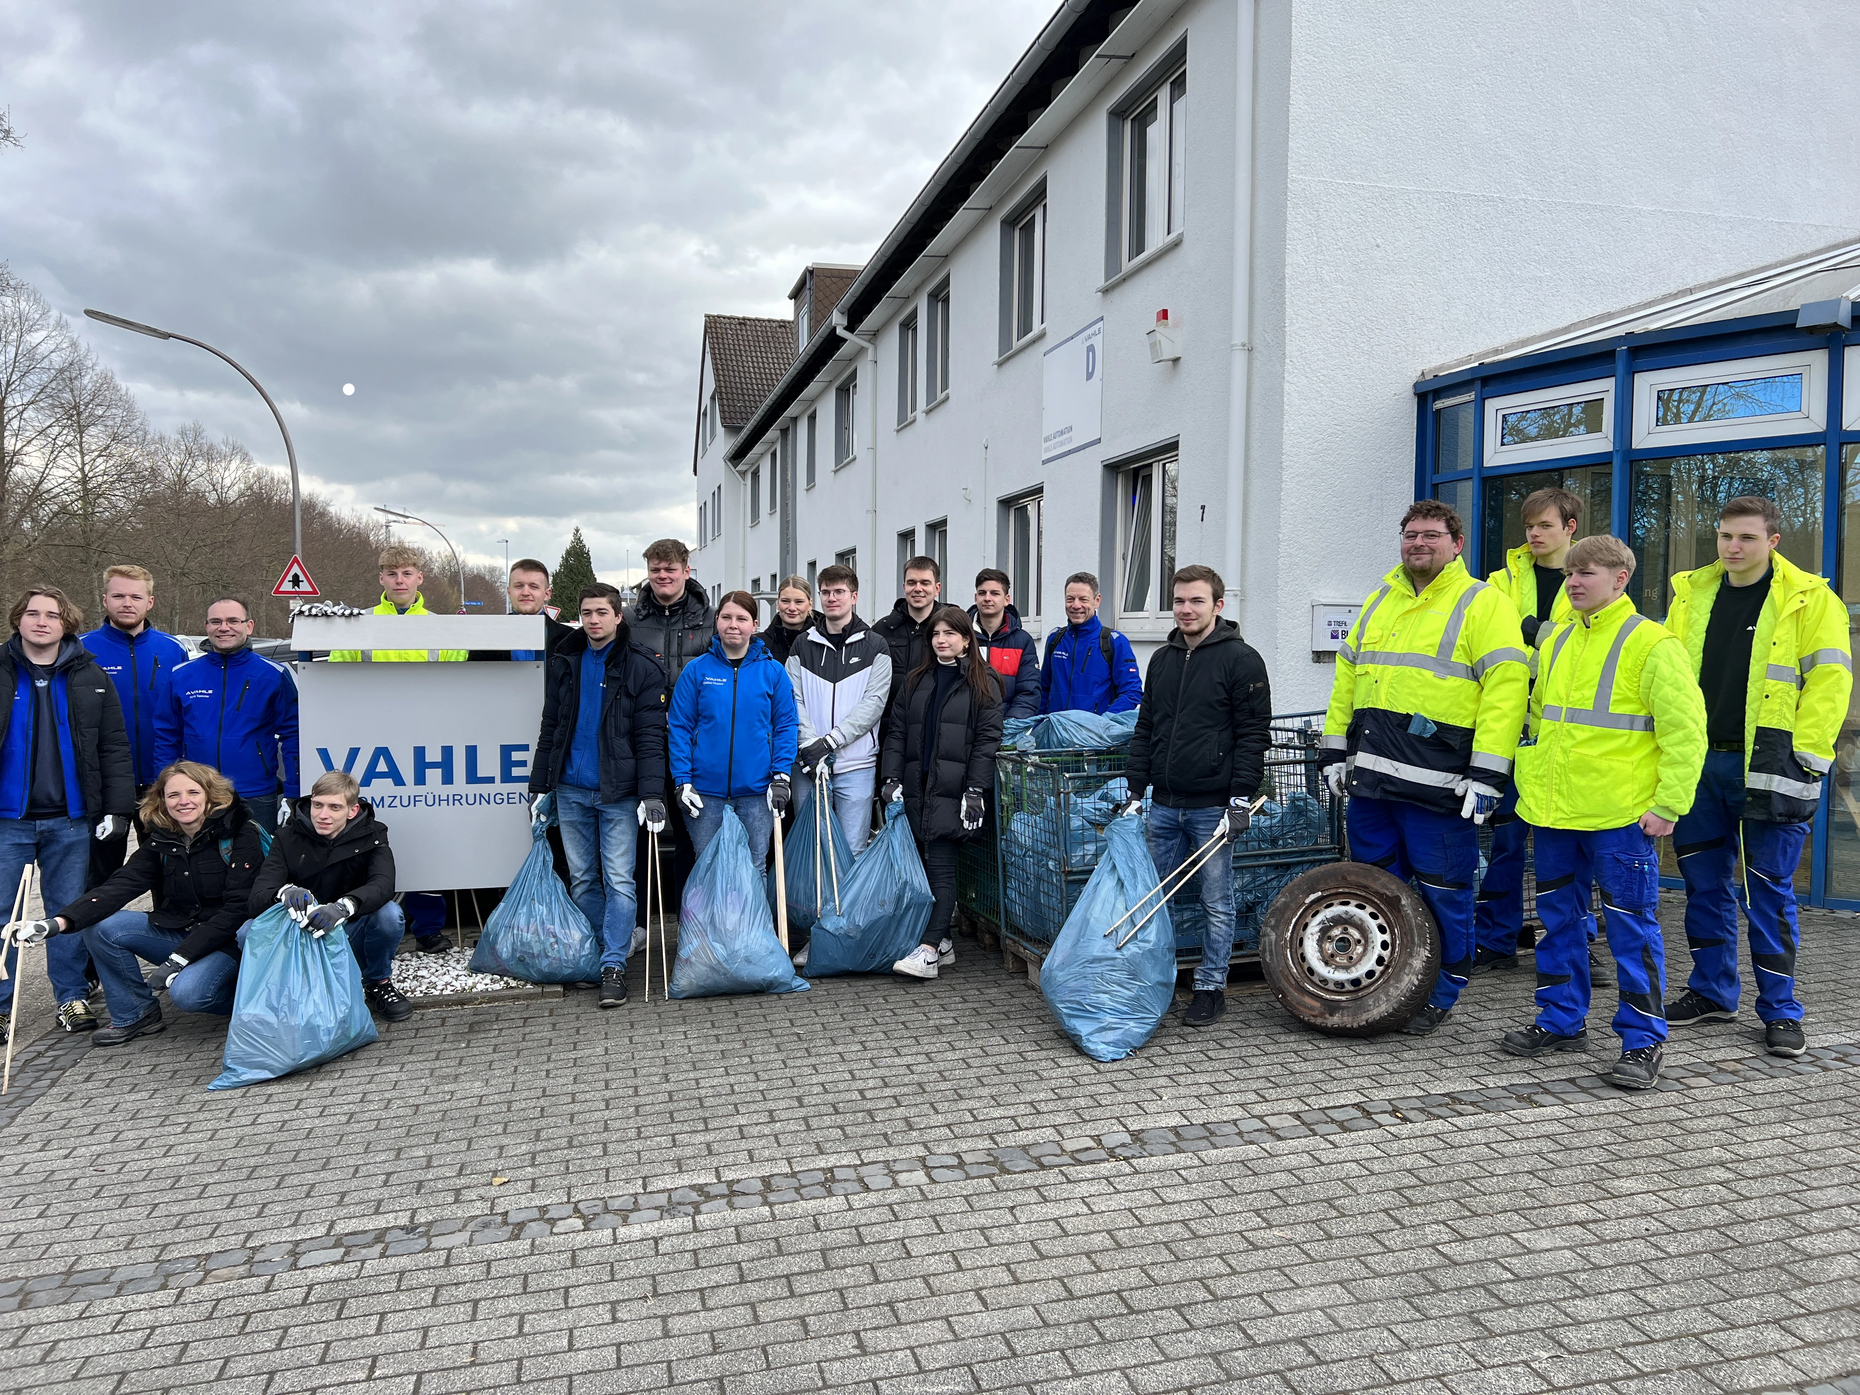 On VAHLE Cleanup Day, the area around our company headquarters in Kamen was cleared of trash and other litter. (Photo: VAHLE)